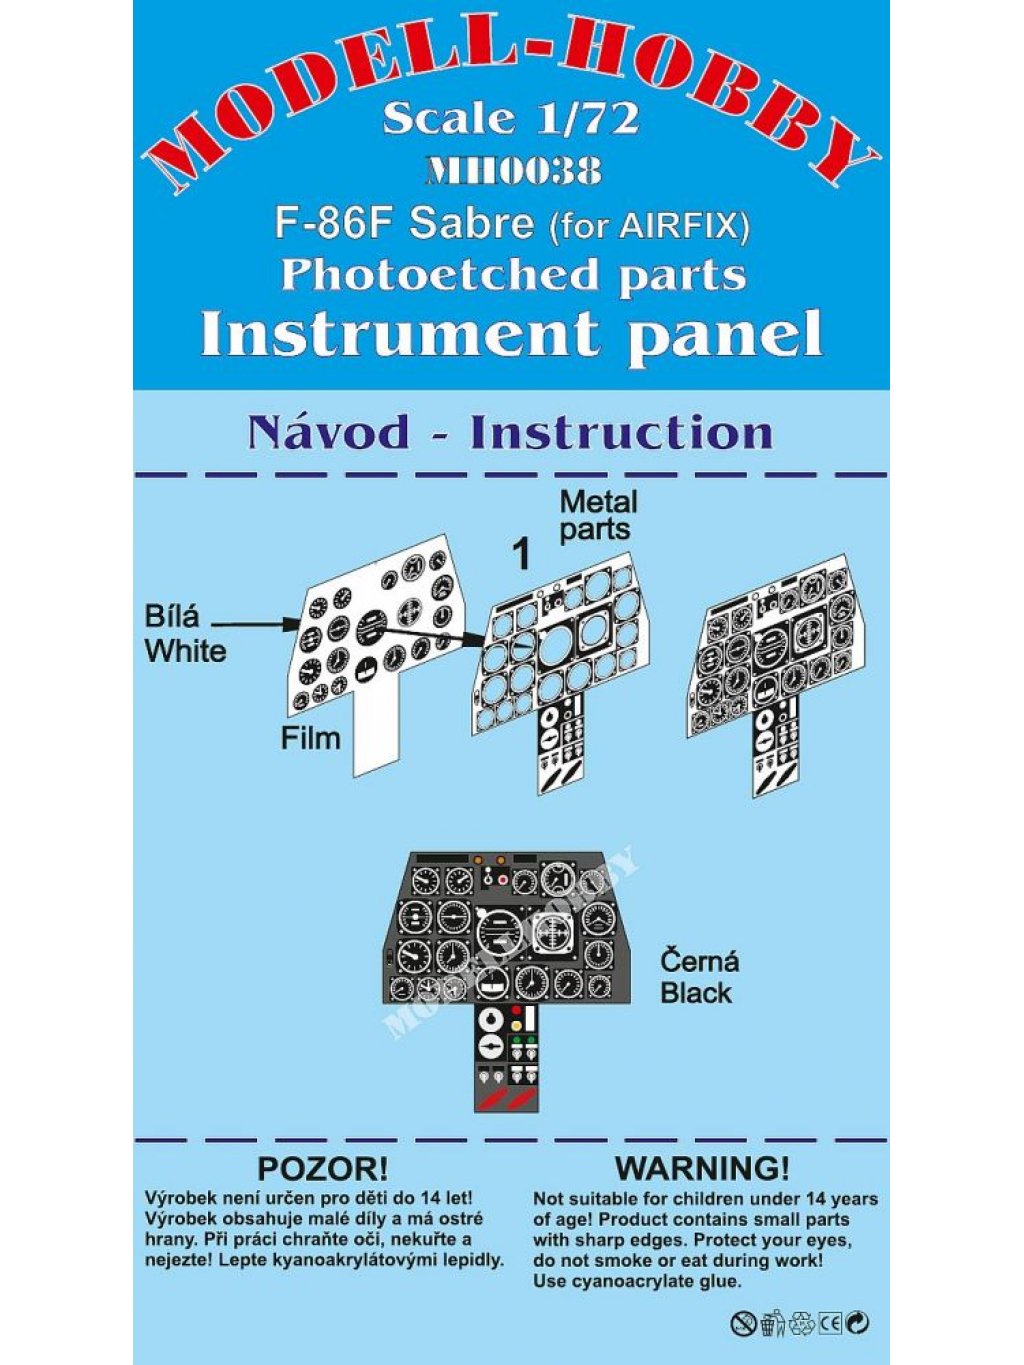 North American F-86F Sabre Photoetched parts instrument panel for Airfix ex Modell-Hobby